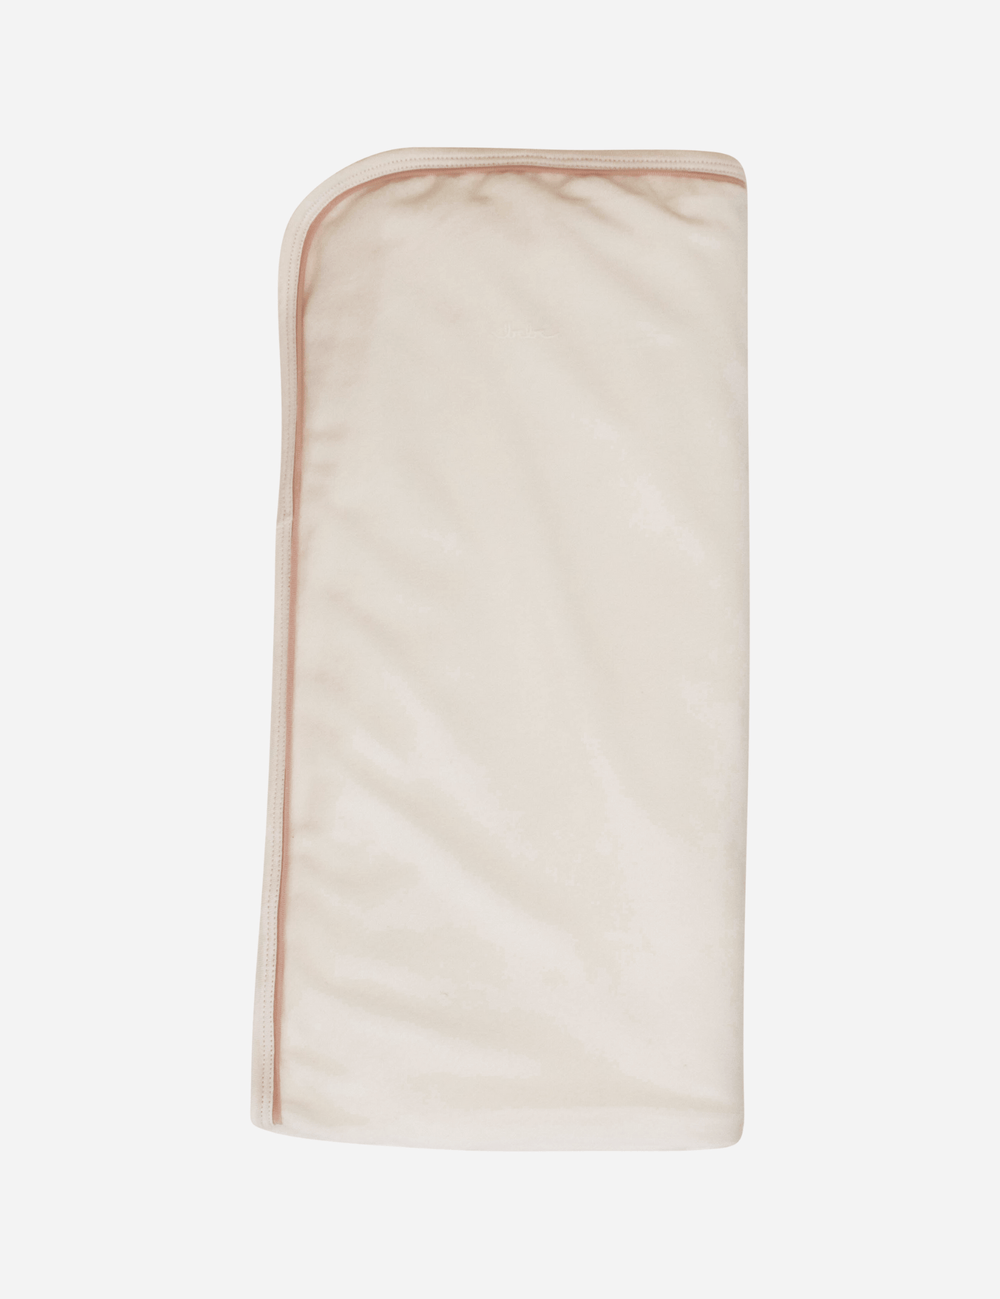 Piped Blanket - Pink